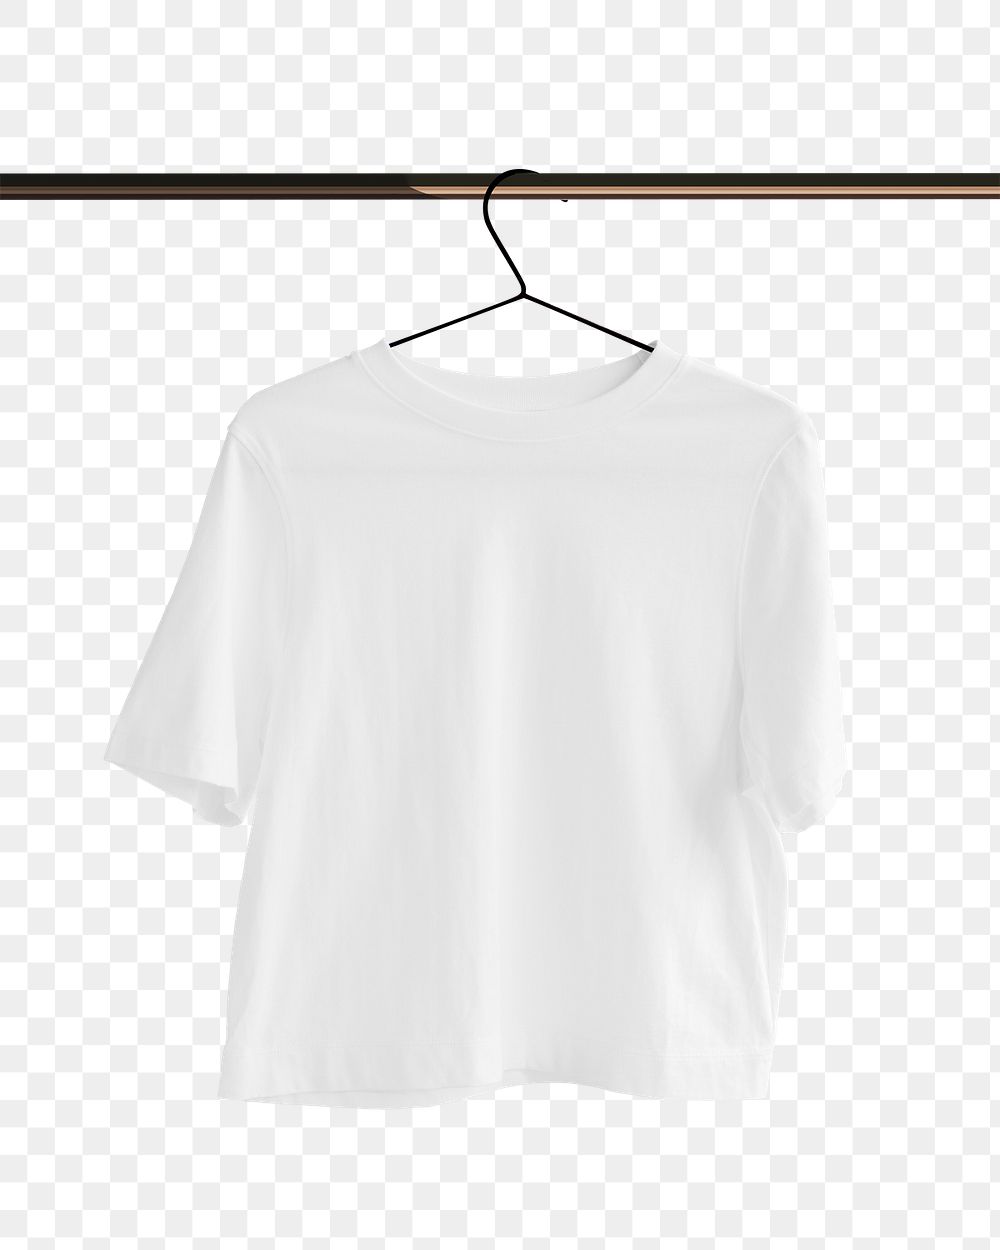 White tee png sticker, hanging on clothing rack in transparent background